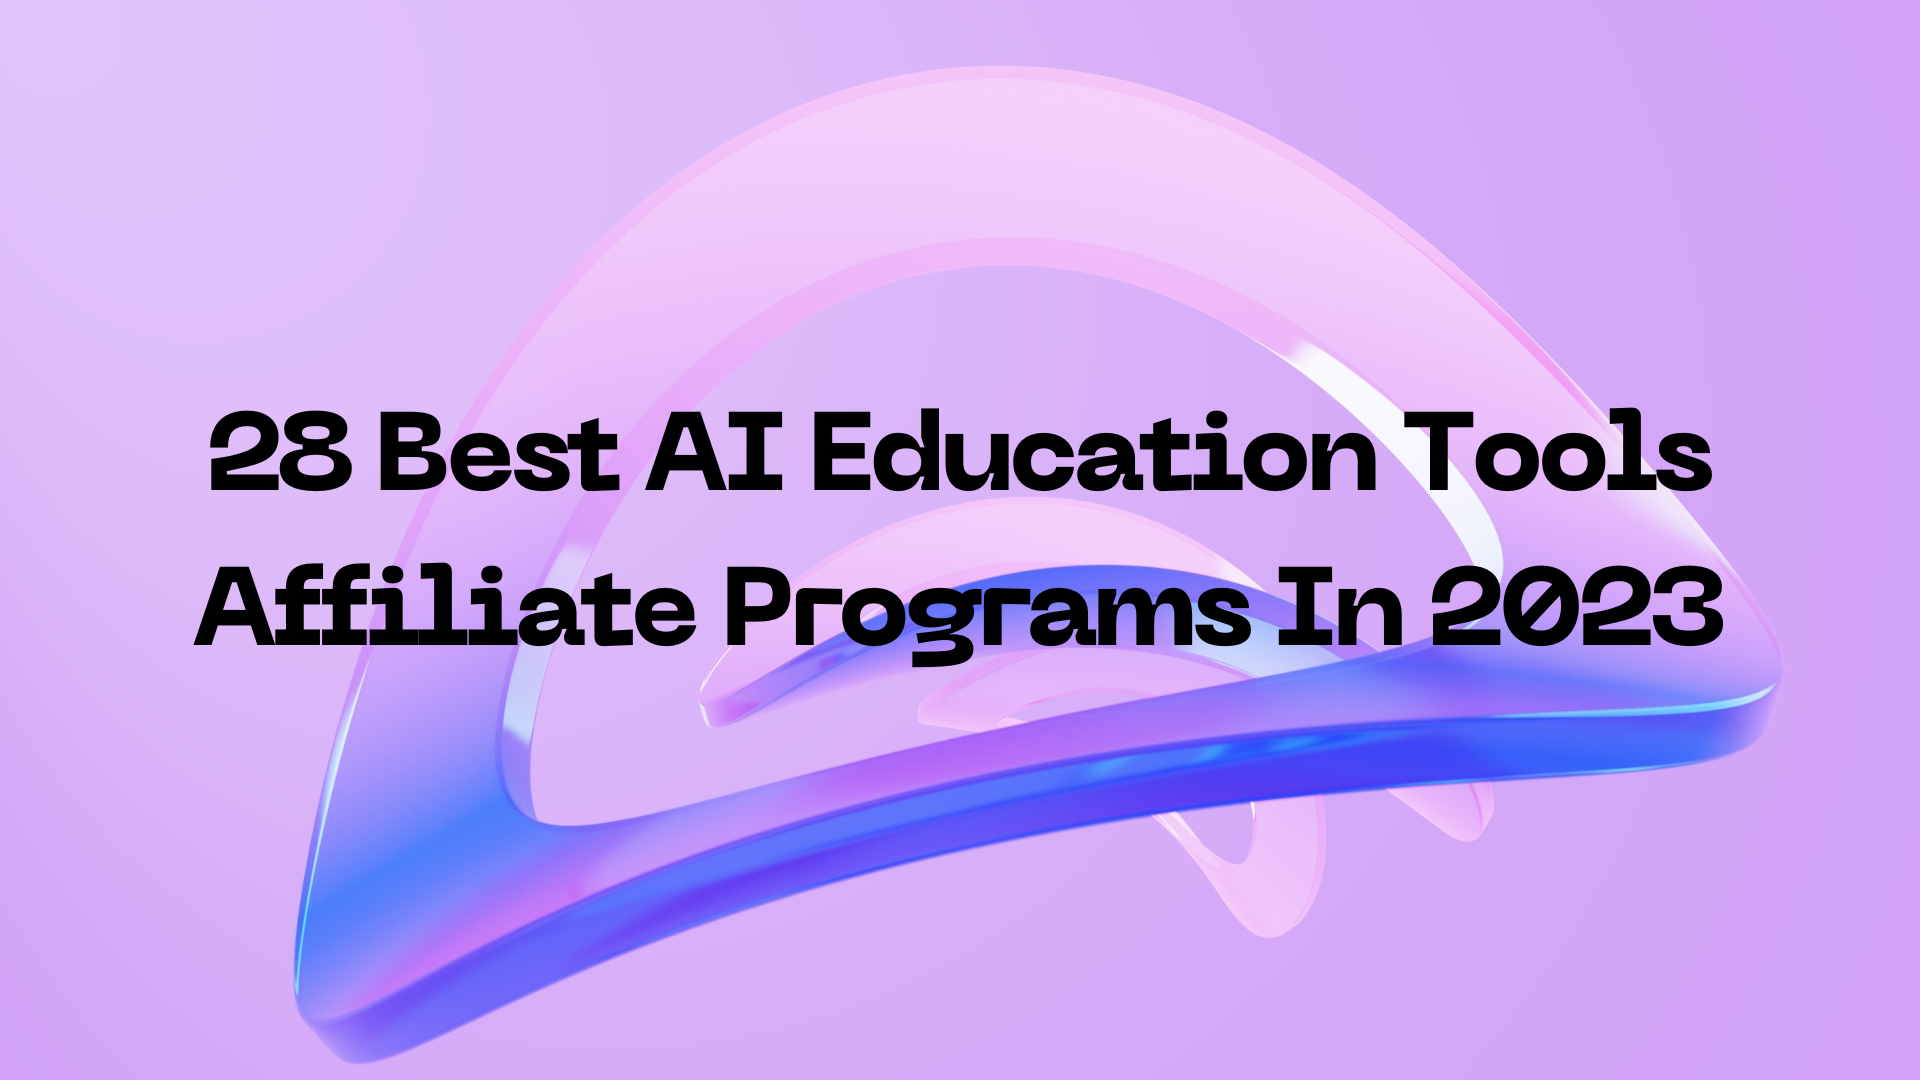 28 Best AI Education Tools Affiliate Programs In 2023